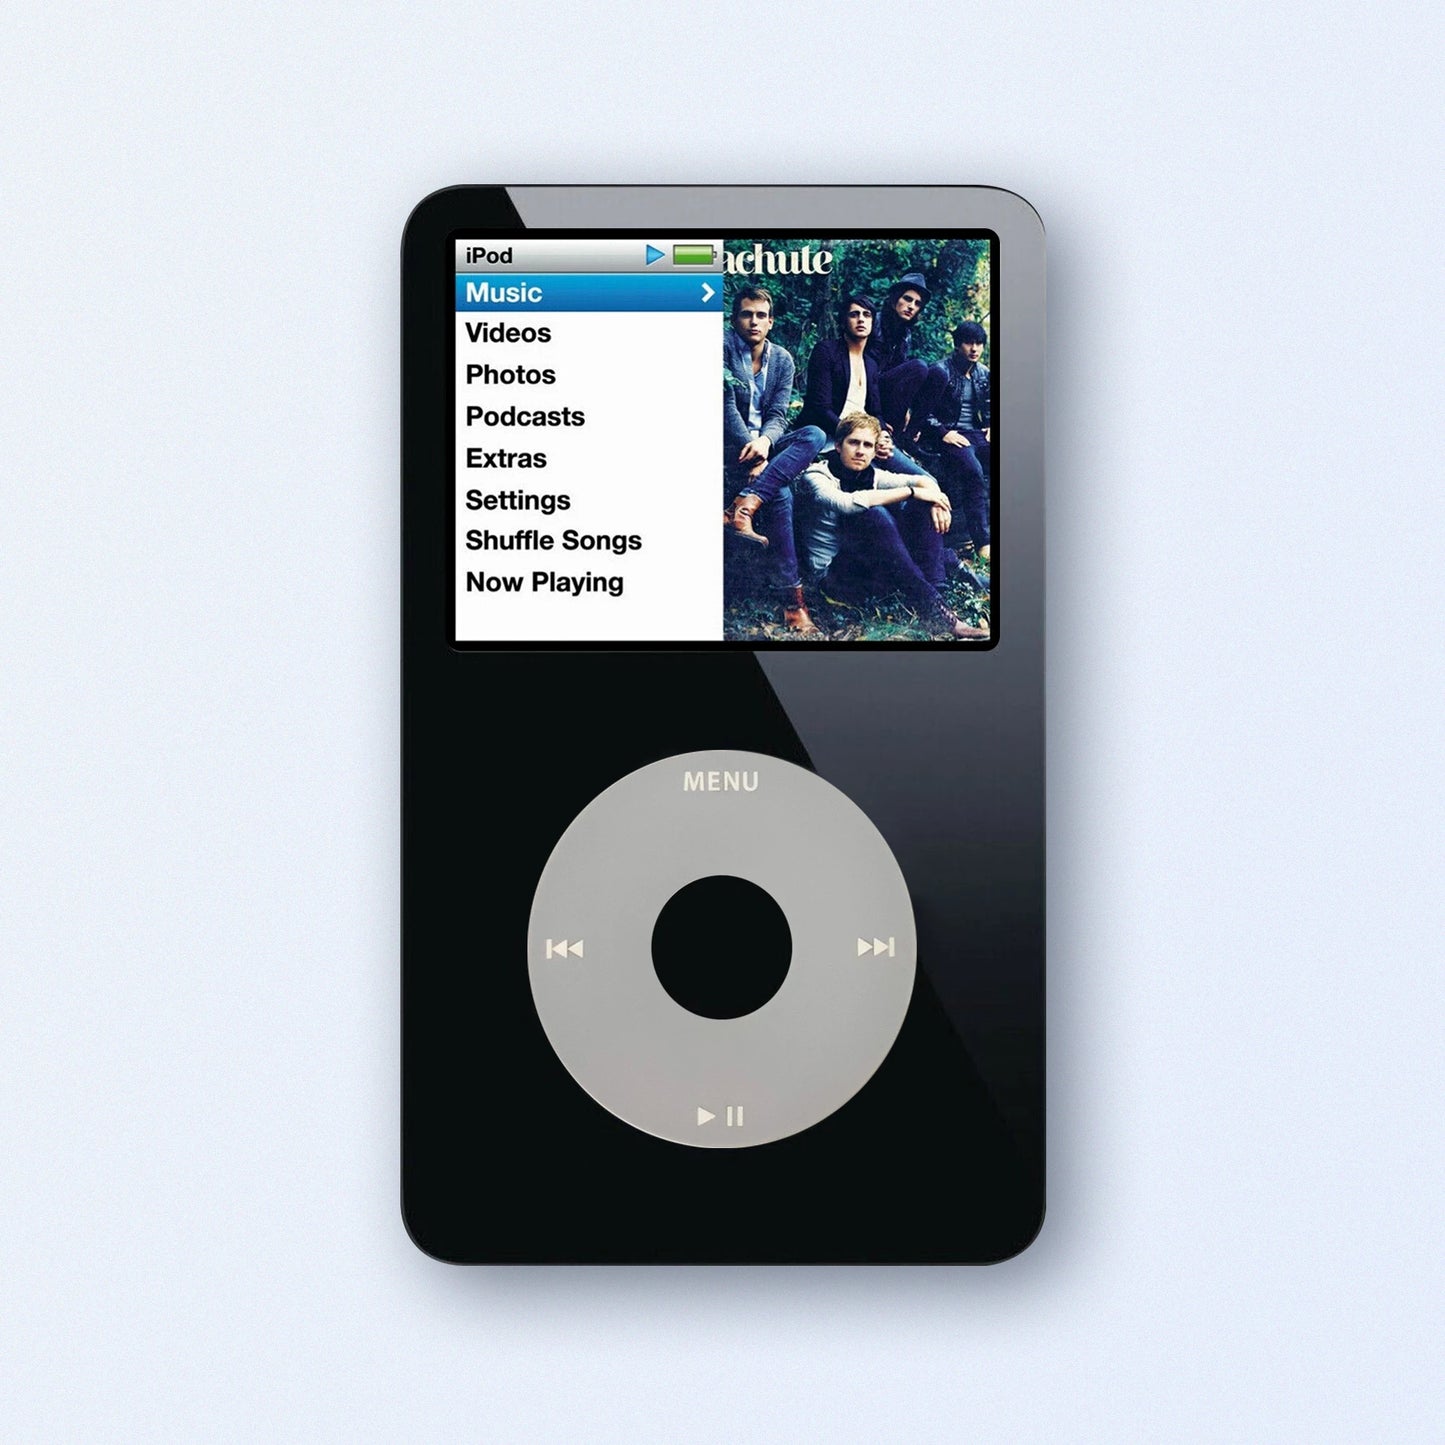 Bluetooth iPod Classic Black 5th Generation upgraded with SDXC Card